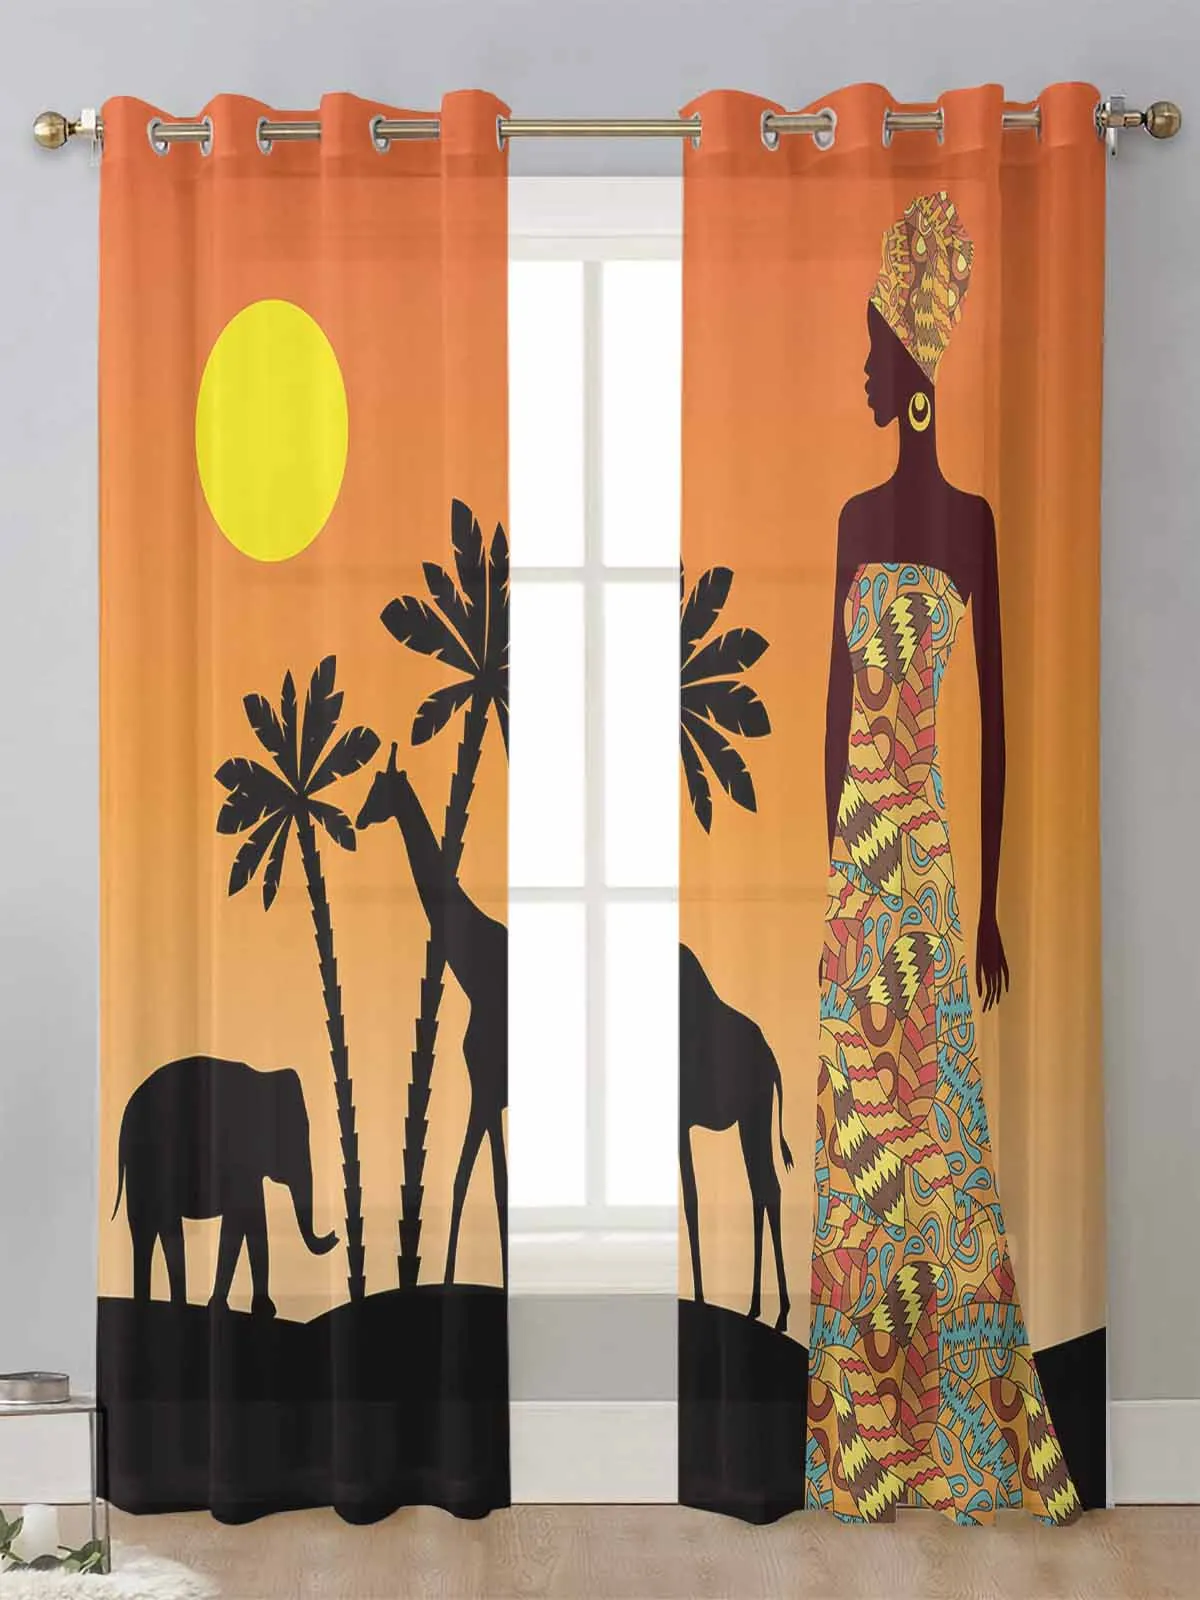 

Africa Sunset Women Elephant Giraffe Sheer Curtains For Living Room Window Voile Tulle Curtain Cortinas Drapes Home Decor